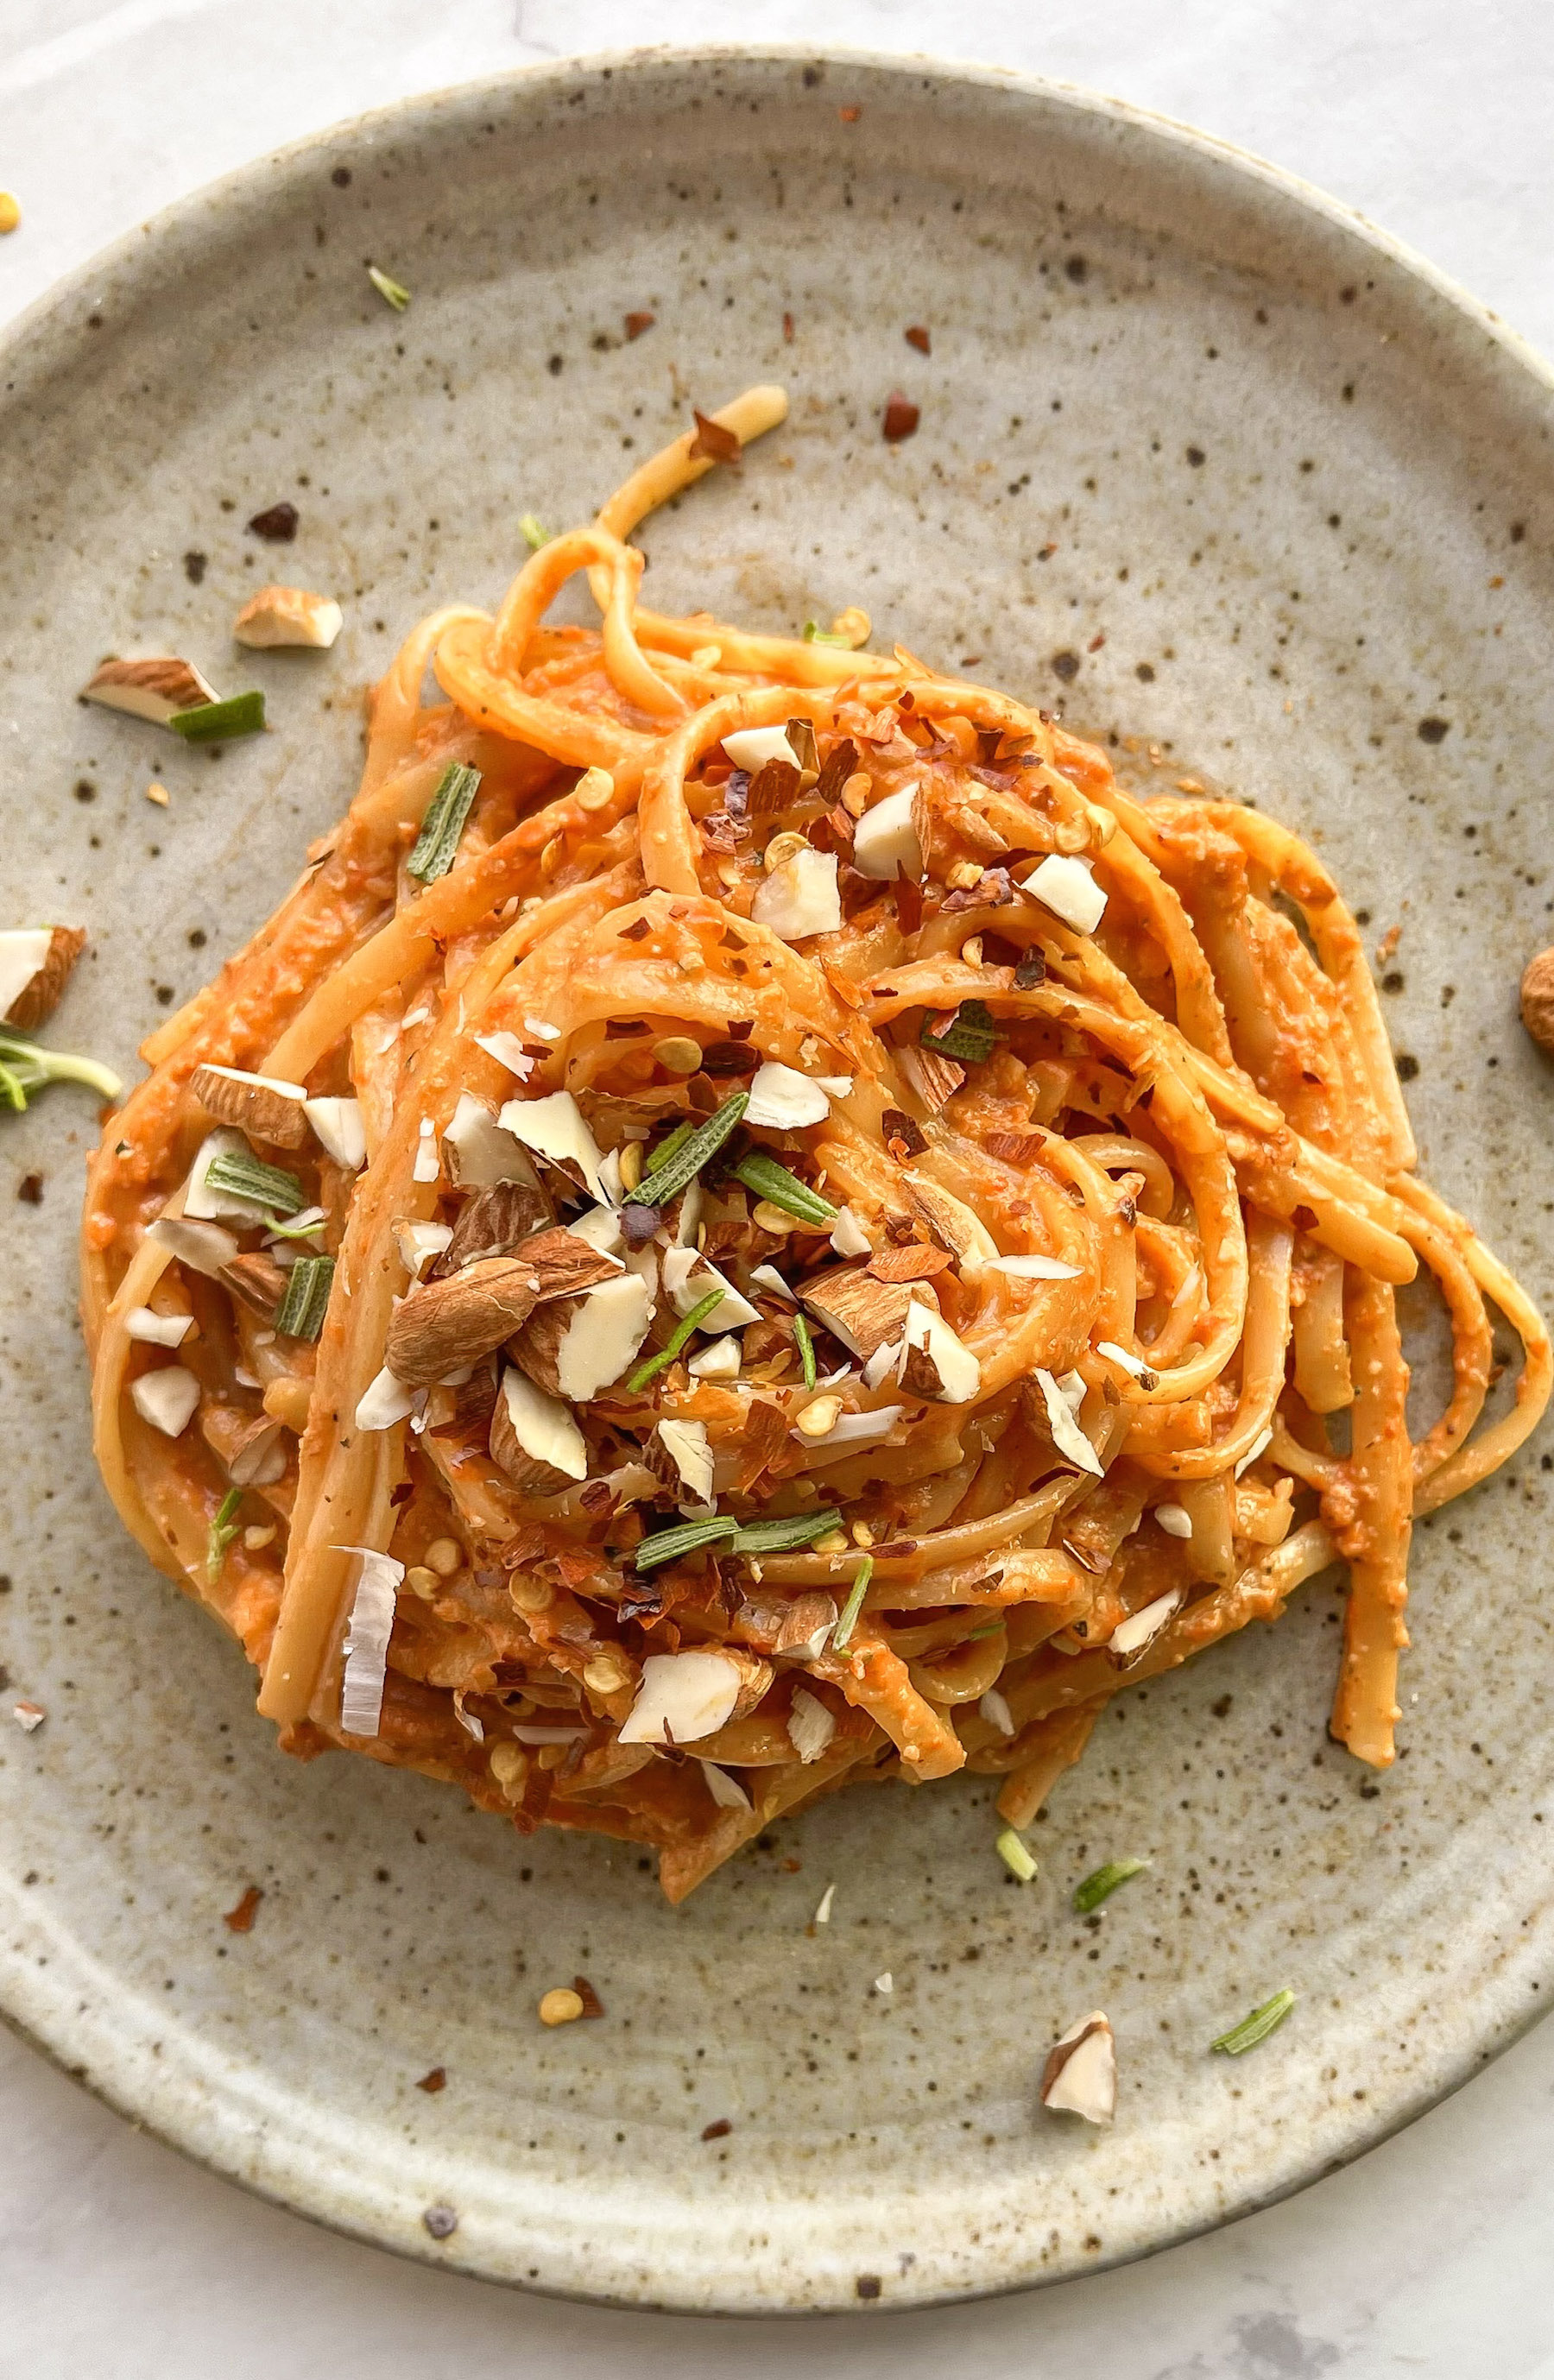 https://www.lizmoody.com/wp-content/uploads/2021/03/Roasted-Garlic-Red-Pepper-Protein-Pasta-1.jpg